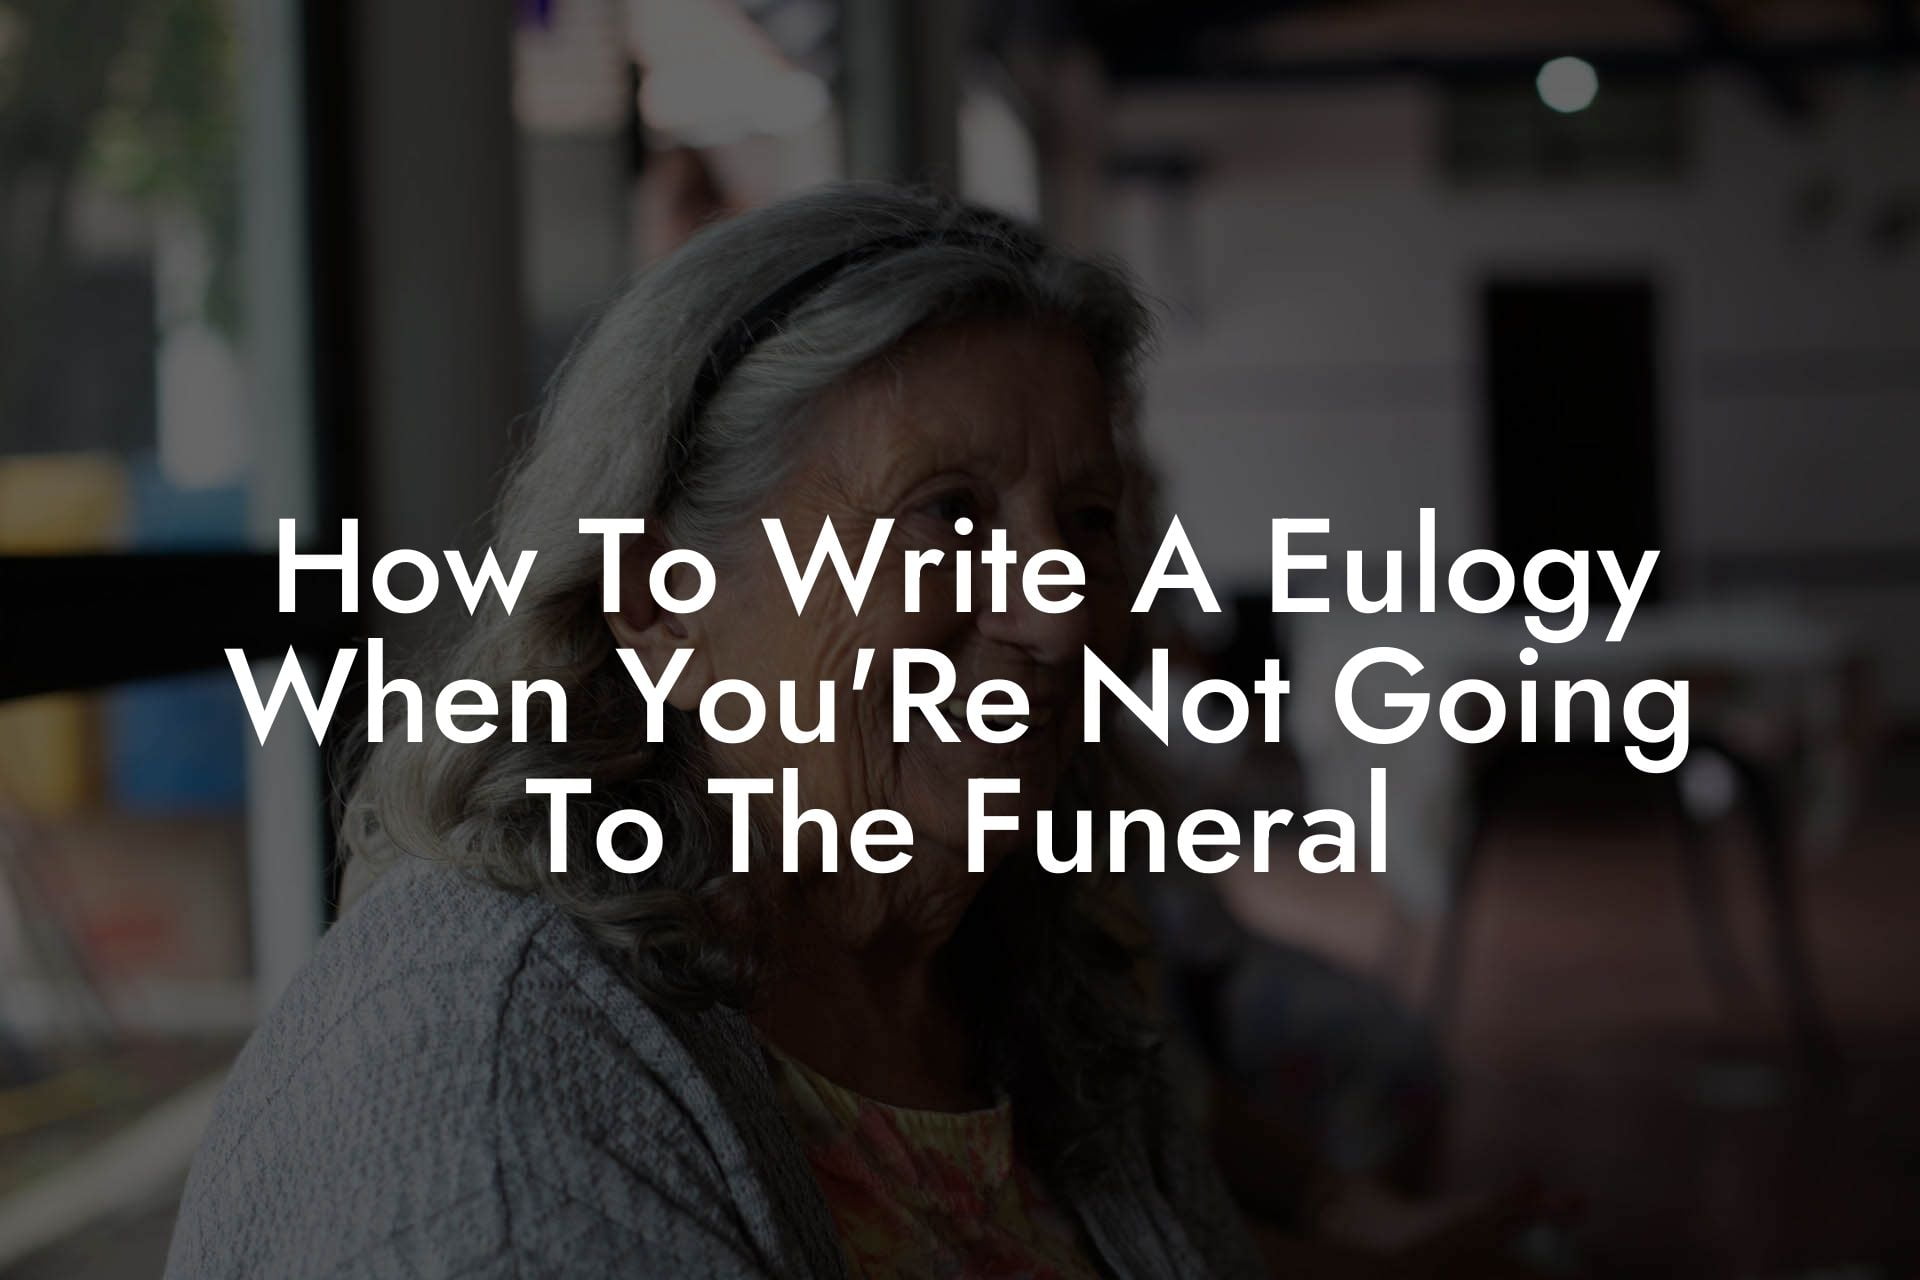 How To Write A Eulogy When You'Re Not Going To The Funeral